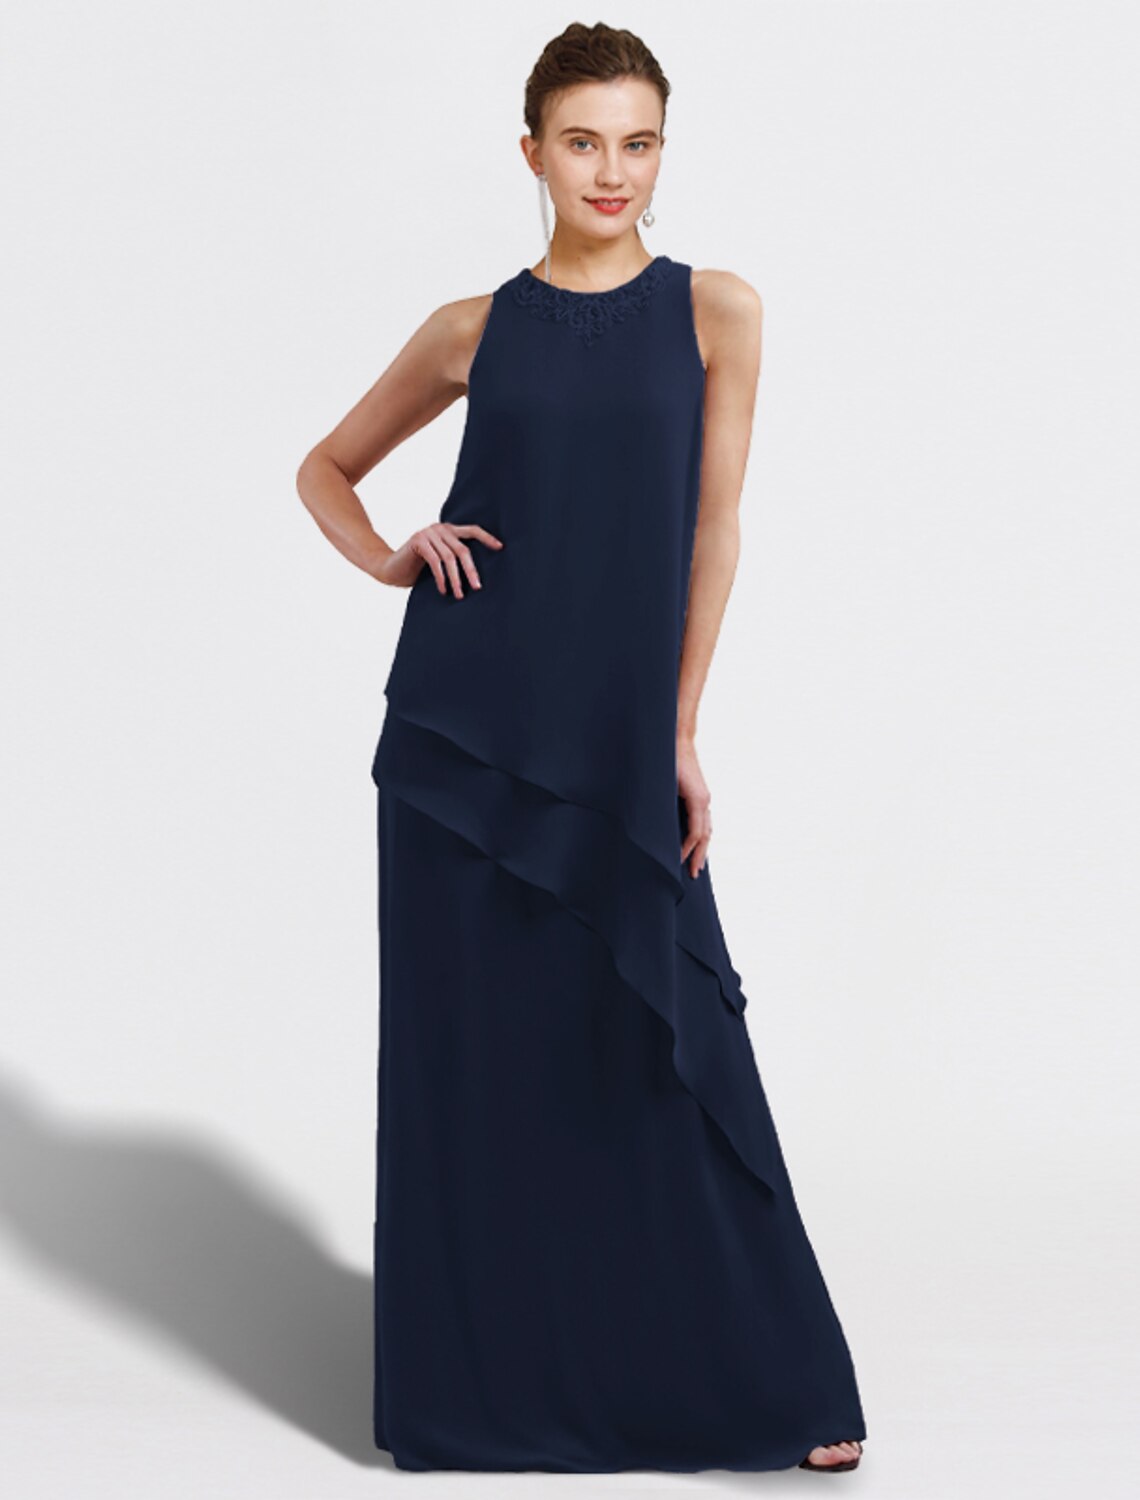 Two Piece A-Line Mother of the Bride Dress Elegant Plus Size Jewel Neck Floor Length Chiffon Sleeveless Wrap Included with Ruffles Appliques